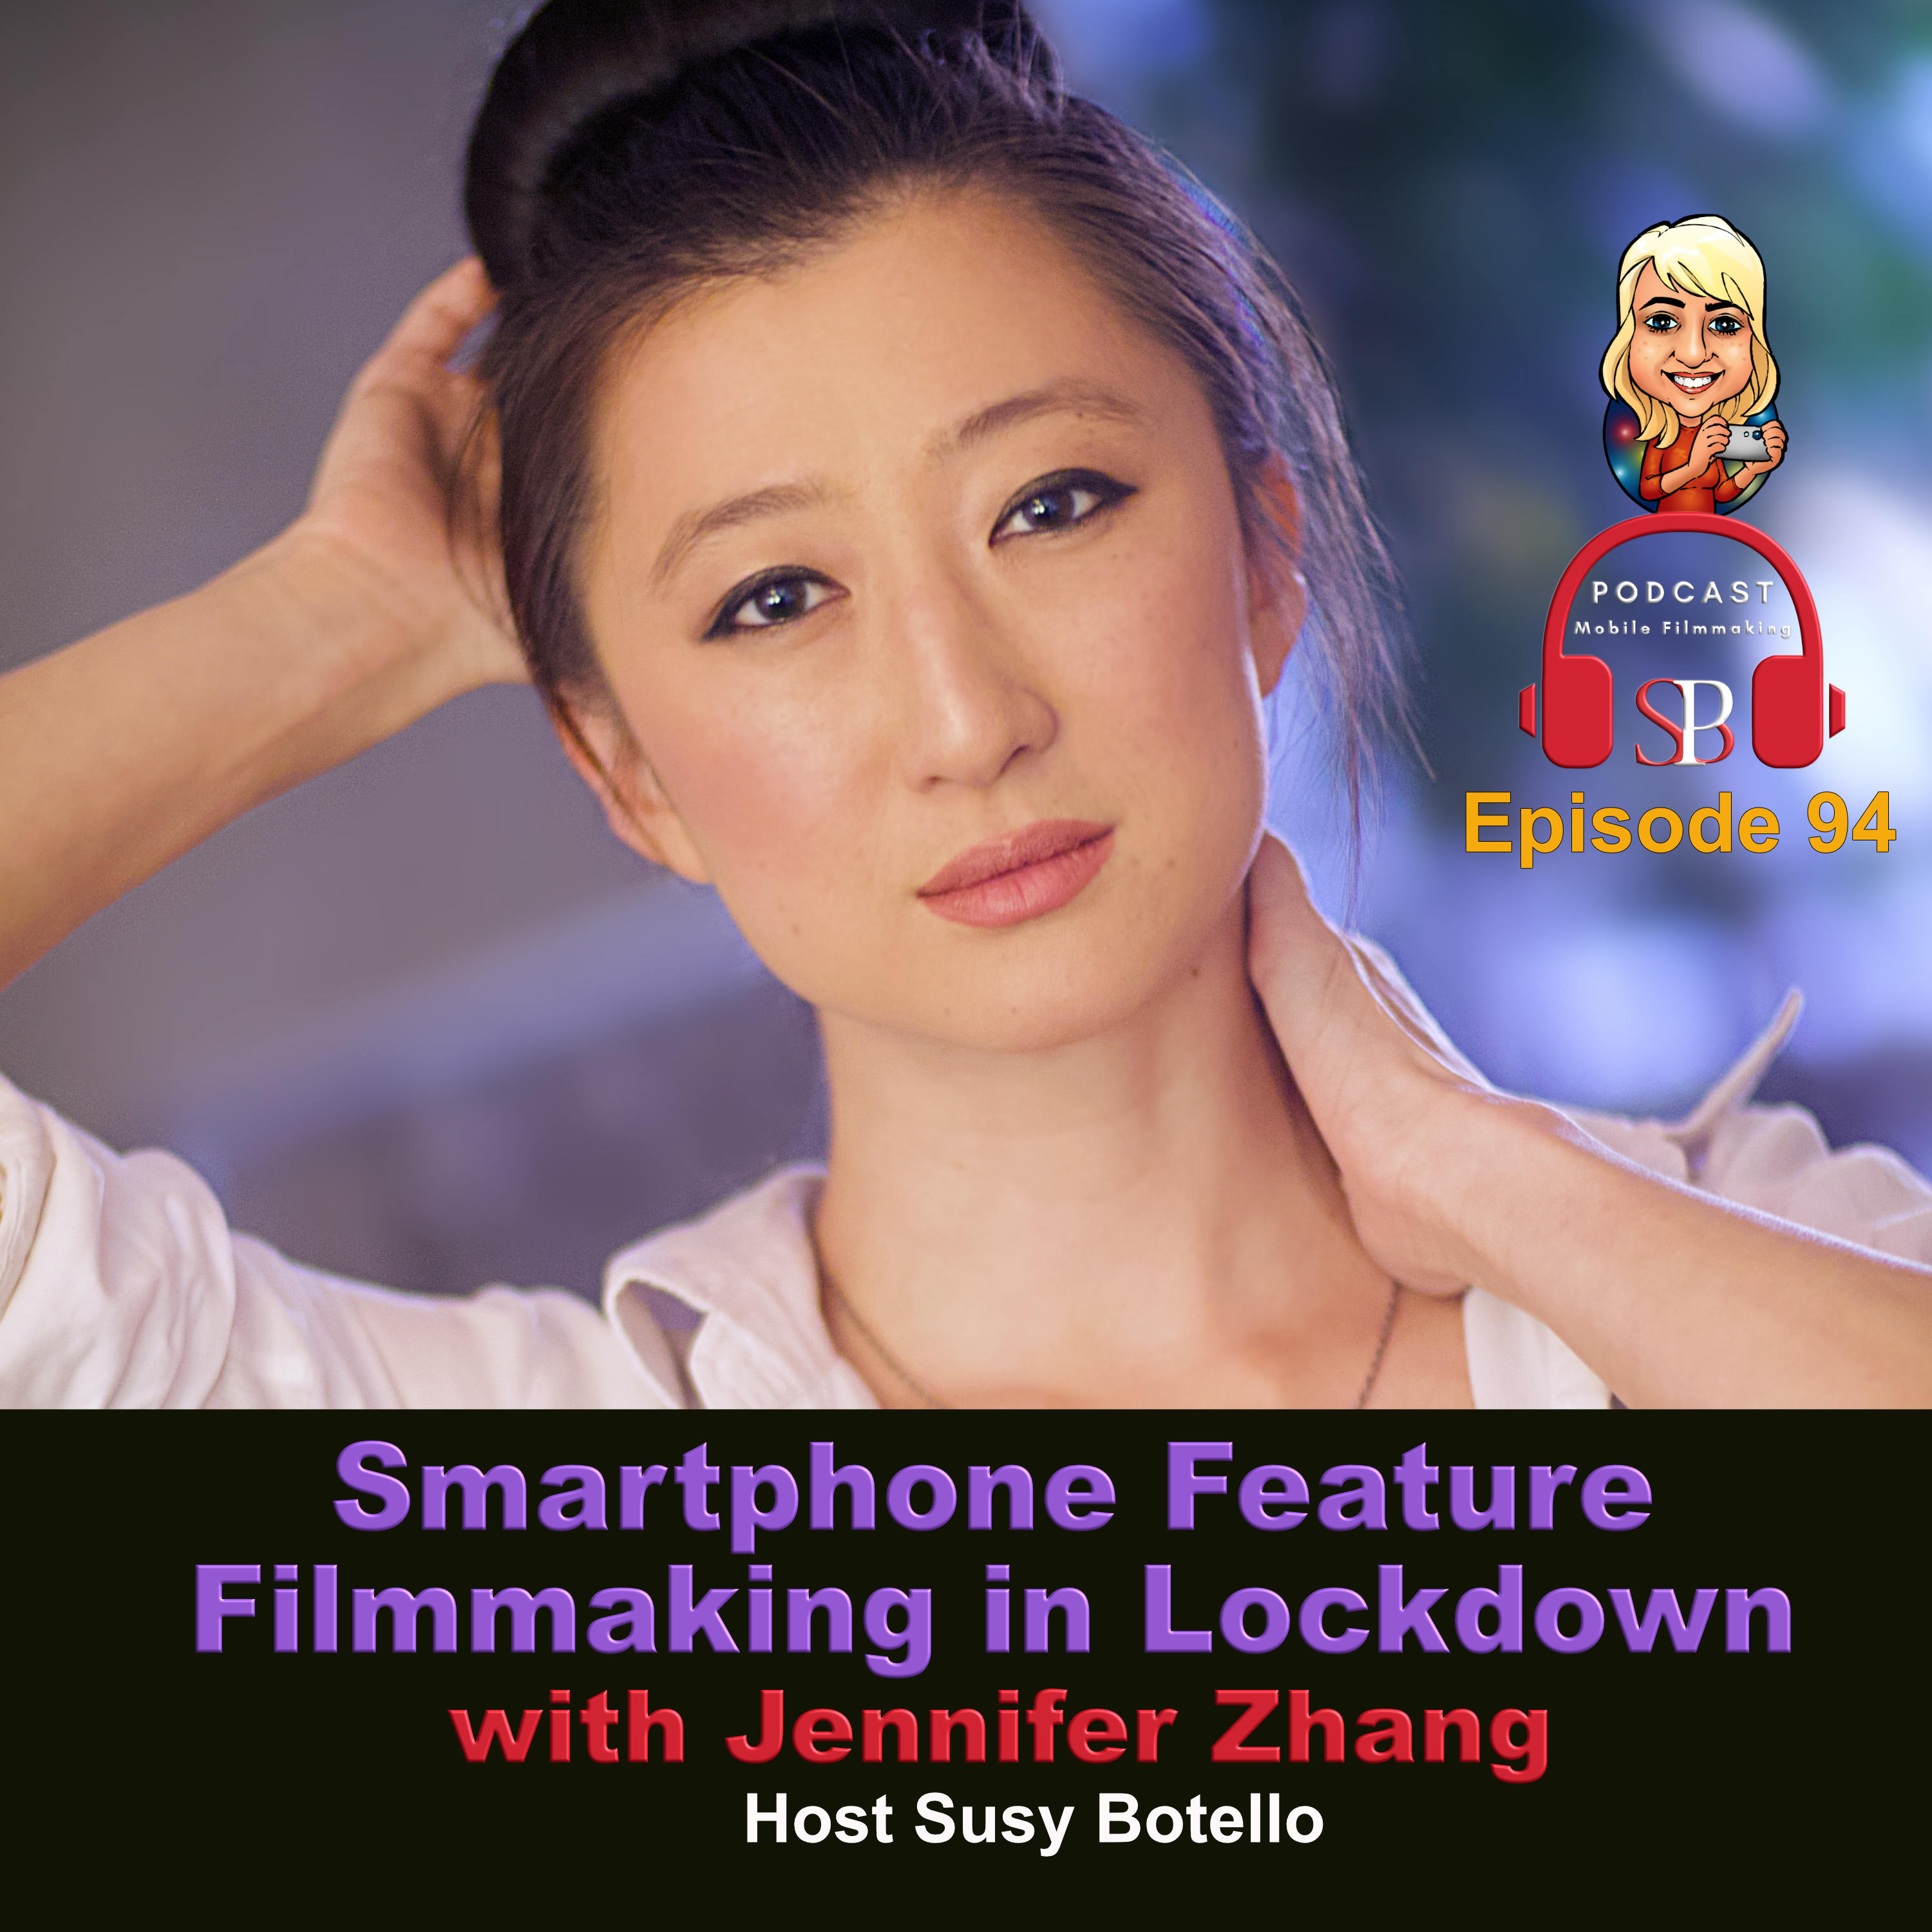 Smartphone Feature Filmmaking in Lockdown with Jennifer Zhang Image